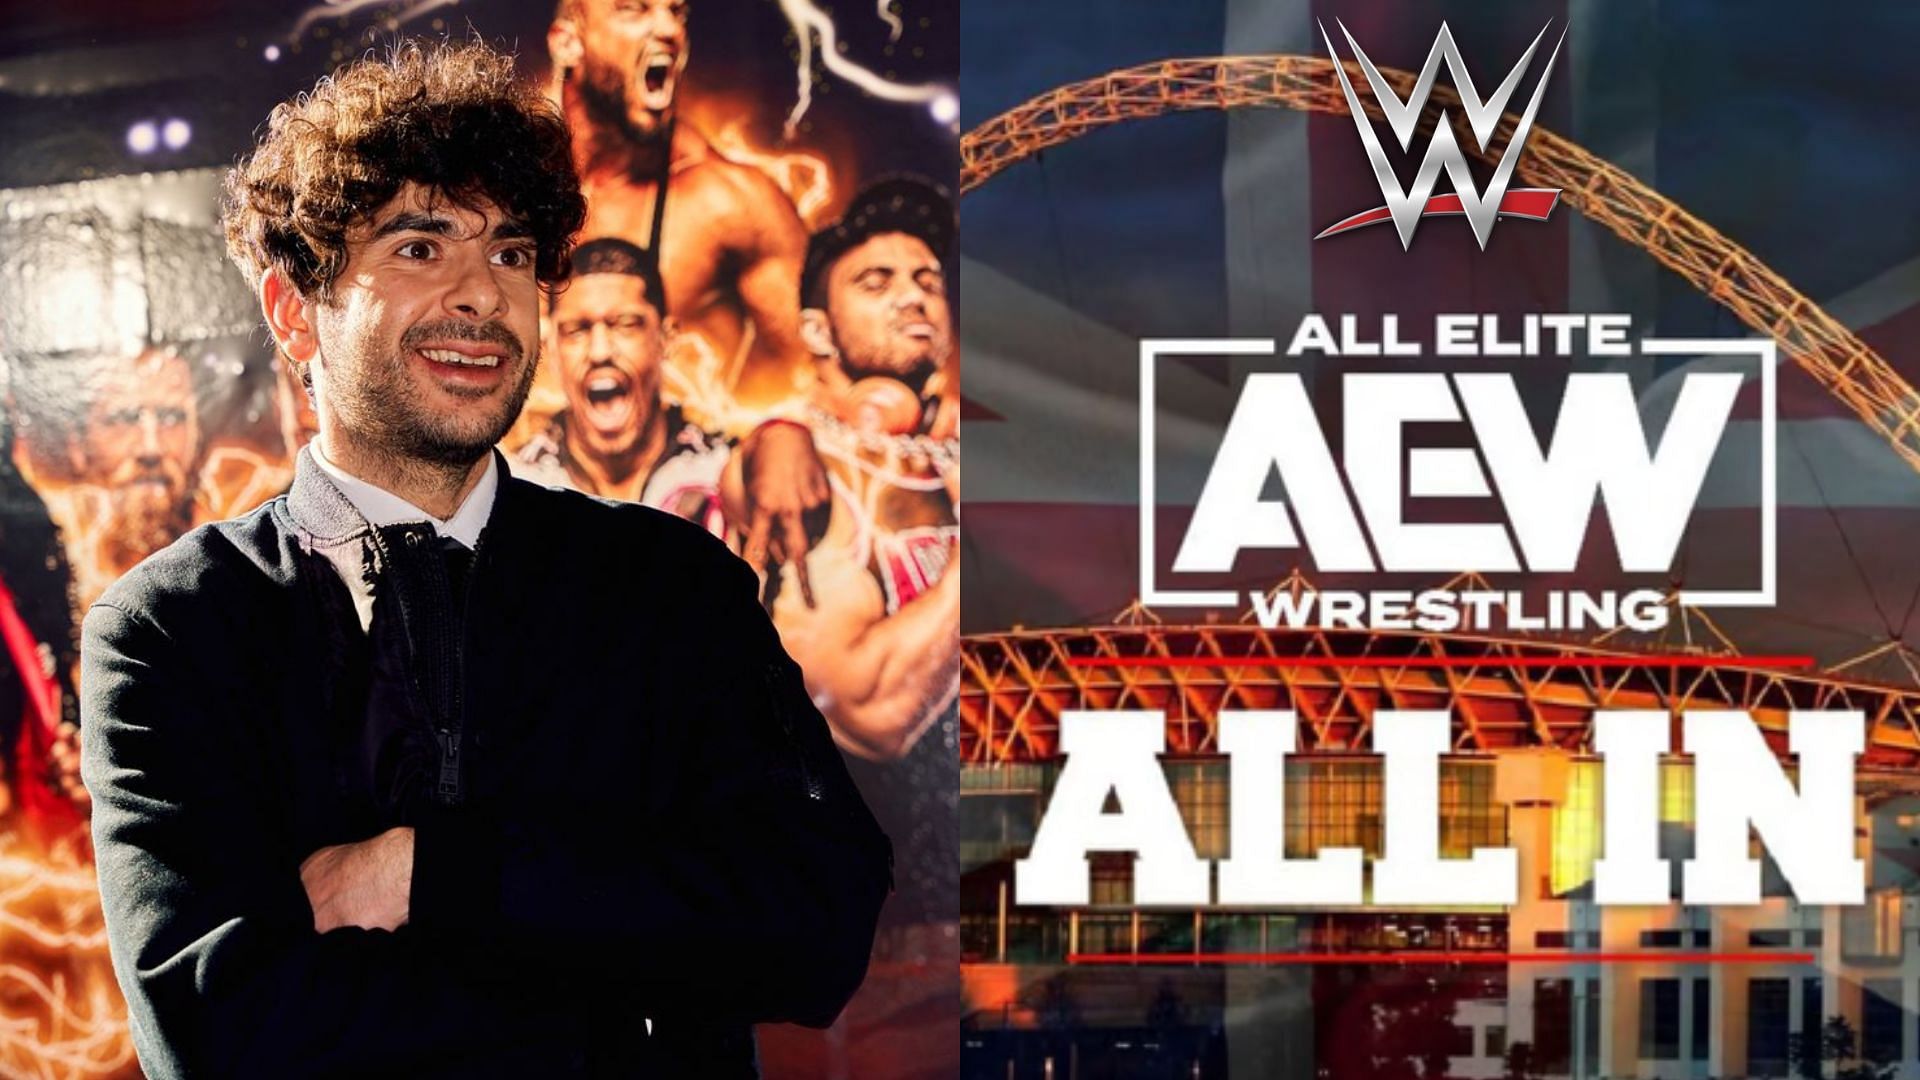 Tony Khan recently announced the All In pay-per-view at Wembley stadium!